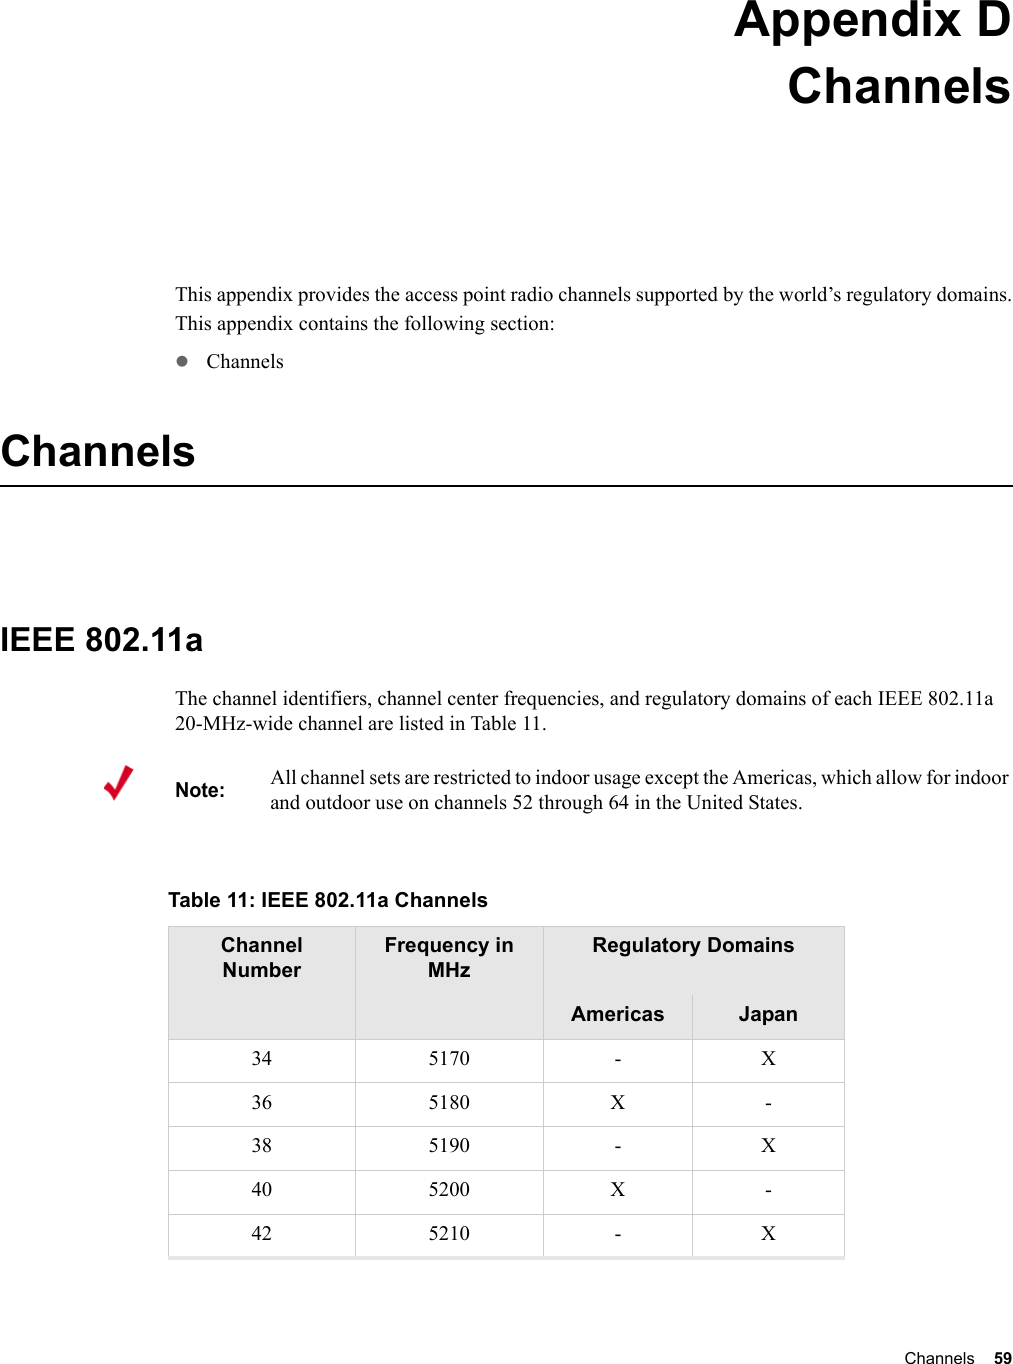 Channels 59 Appendix DChannelsB-1This appendix provides the access point radio channels supported by the world’s regulatory domains.This appendix contains the following section:zChannelsChannelsIEEE 802.11aThe channel identifiers, channel center frequencies, and regulatory domains of each IEEE 802.11a 20-MHz-wide channel are listed in Table 11. Note:All channel sets are restricted to indoor usage except the Americas, which allow for indoor and outdoor use on channels 52 through 64 in the United States. Table 11: IEEE 802.11a Channels Channel NumberFrequency in MHzRegulatory DomainsAmericas Japan34 5170 - X36 5180 X -38 5190 - X40 5200 X -42 5210 - X